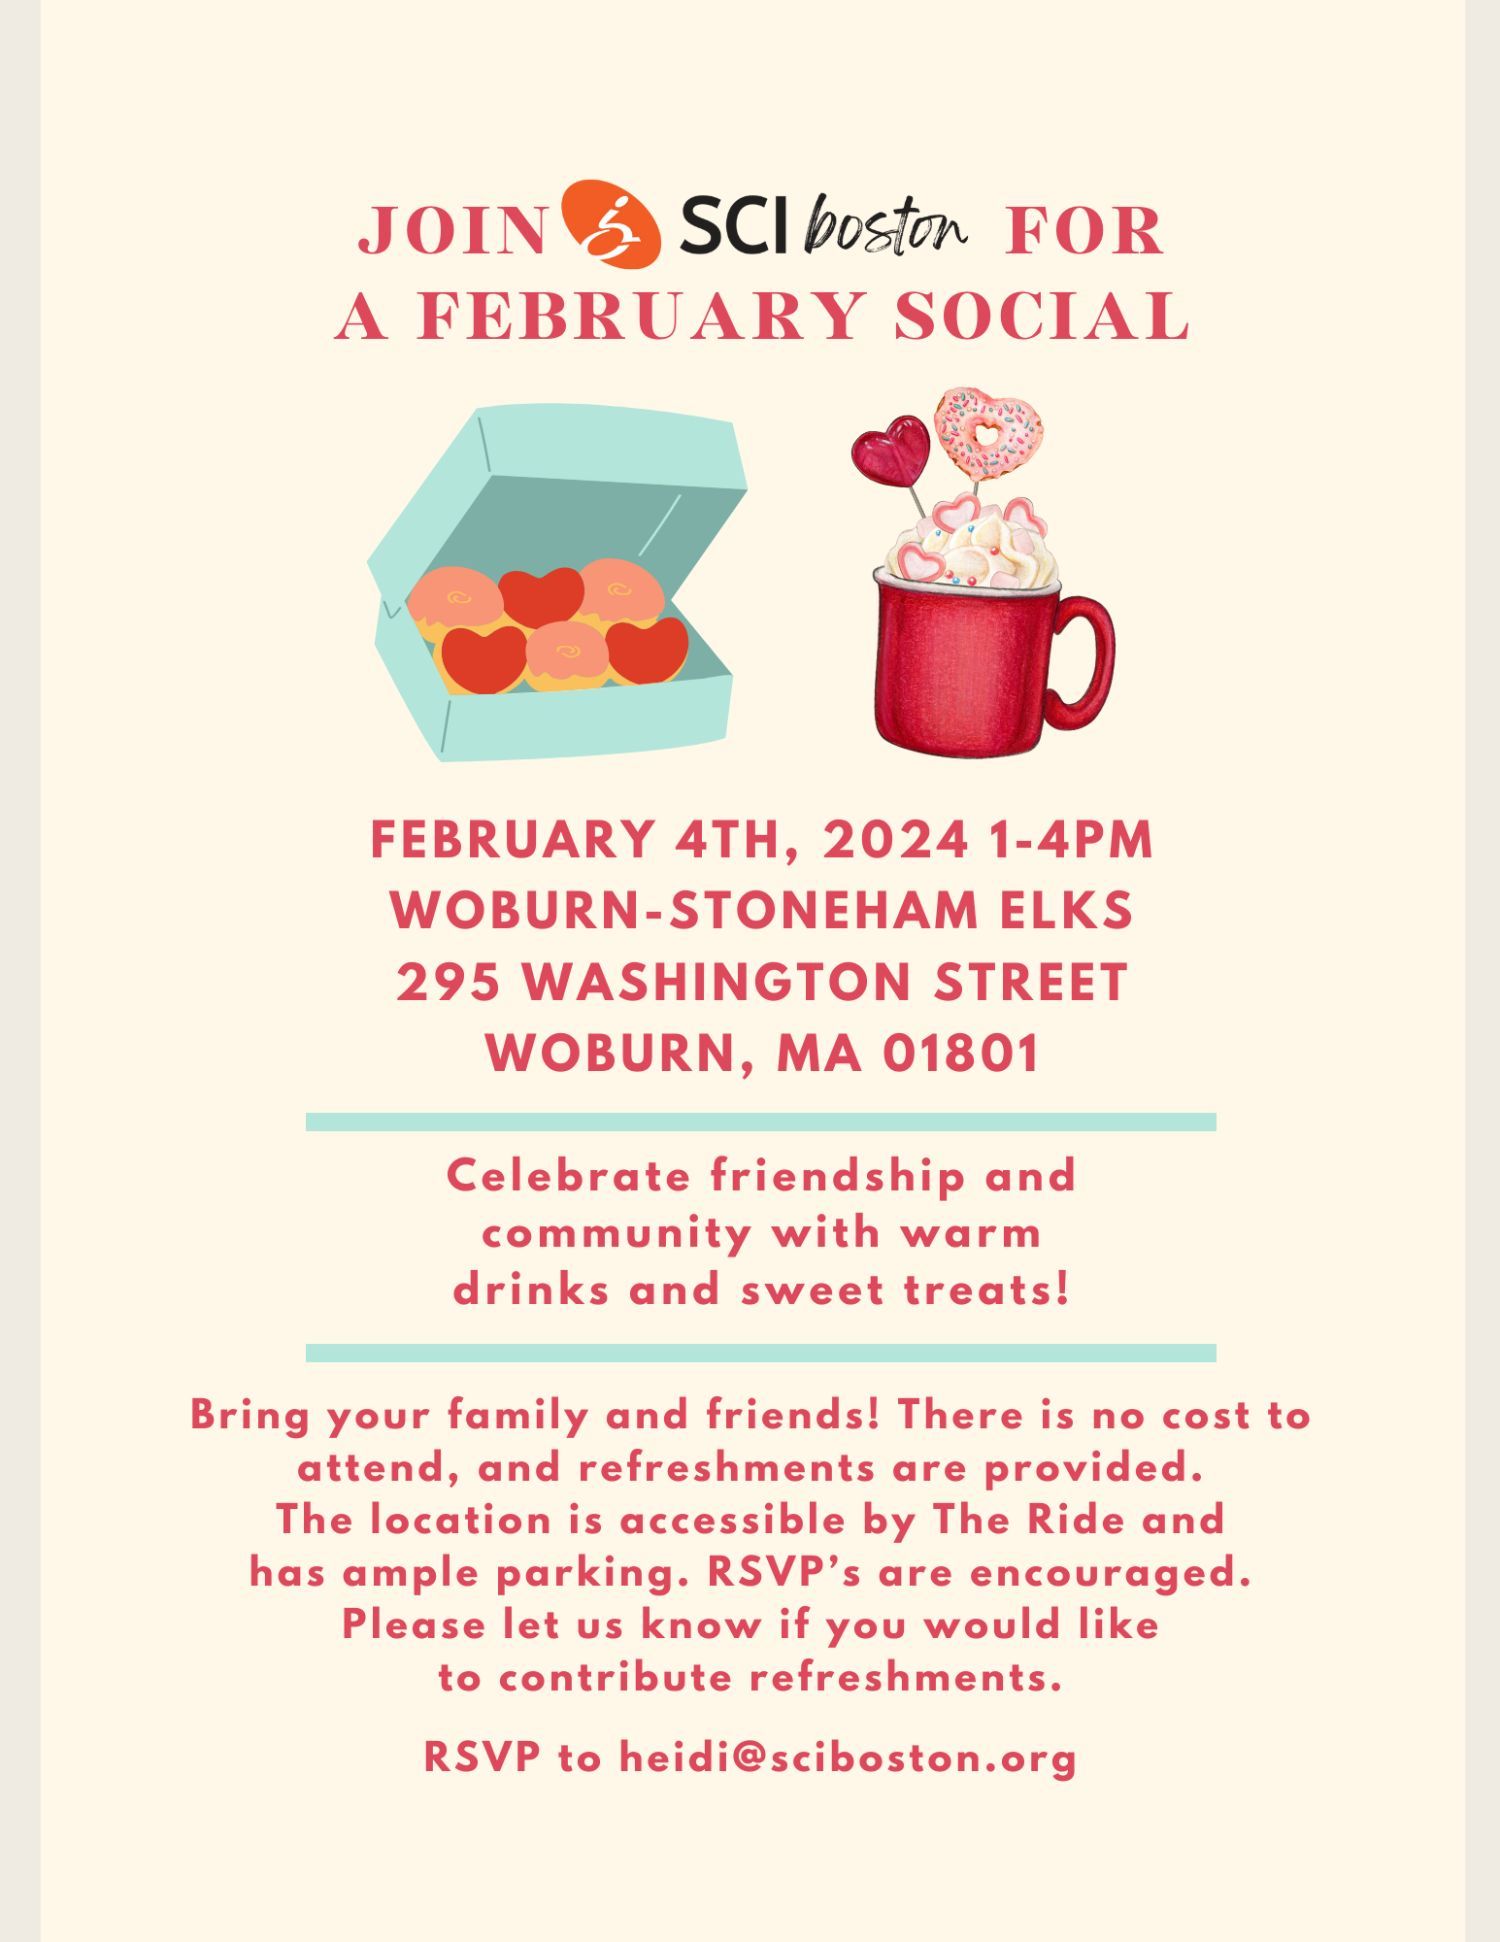 SCIboston with your social, February 4, 1-4 PM at Woburn -Stoneham elks, Woburn, MA. Celebrate friendship and community with warm drinks and sweet treats. RSVP to heidi@sciboston.org.